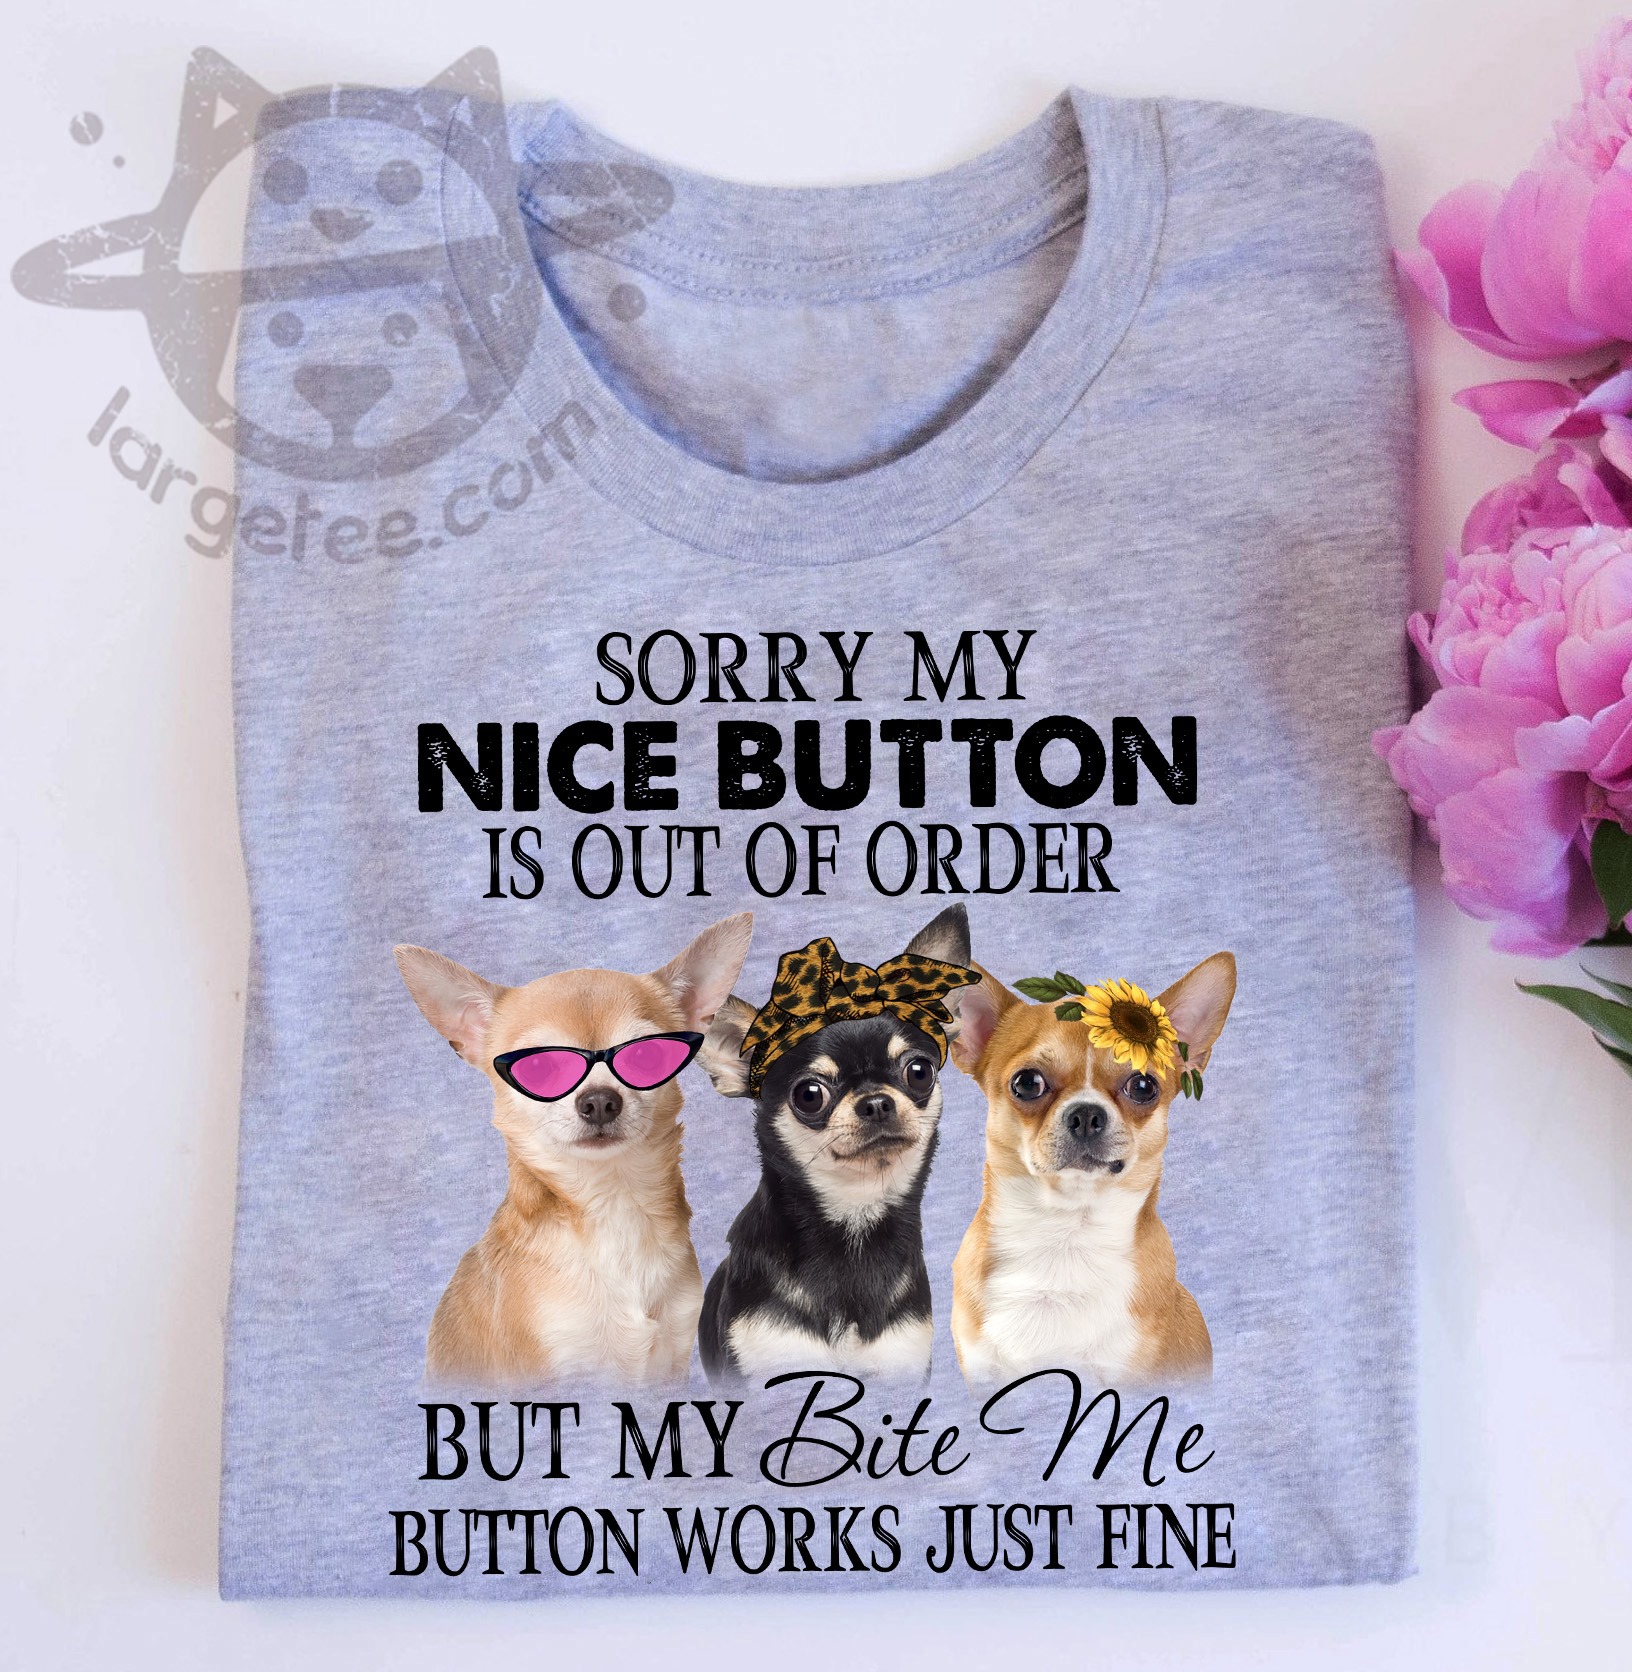 Sorry my nice button is out of order but my bite me button works just fine - Chihuahua dog